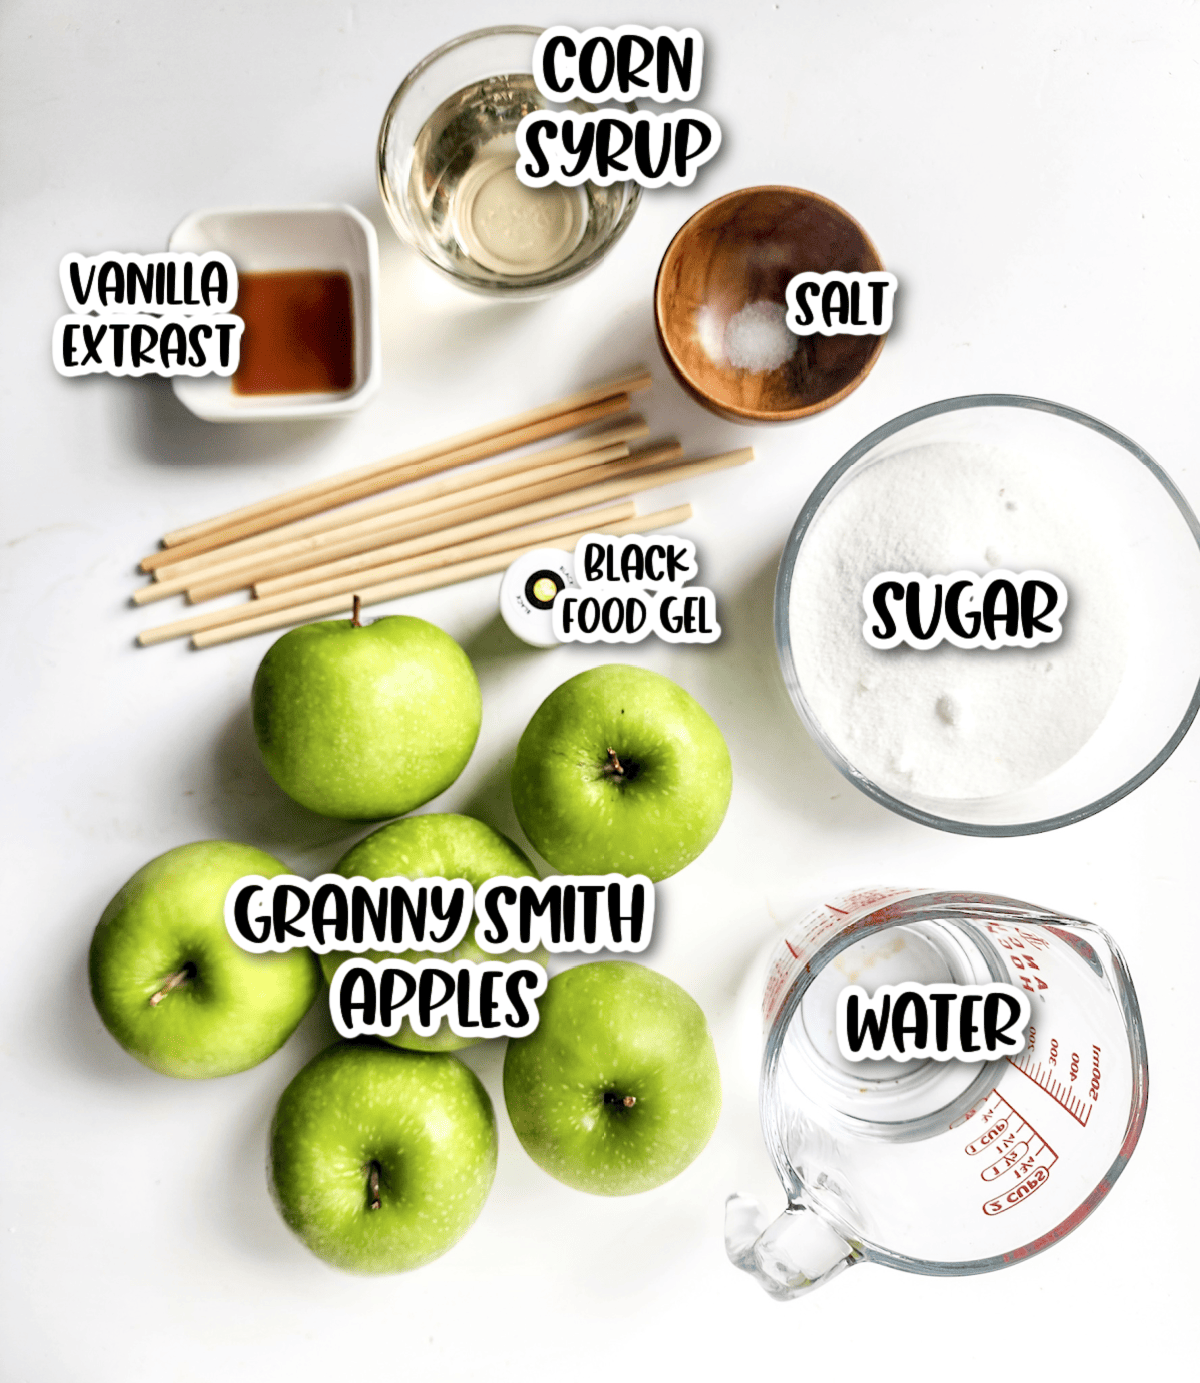 Ingredients for poison apples